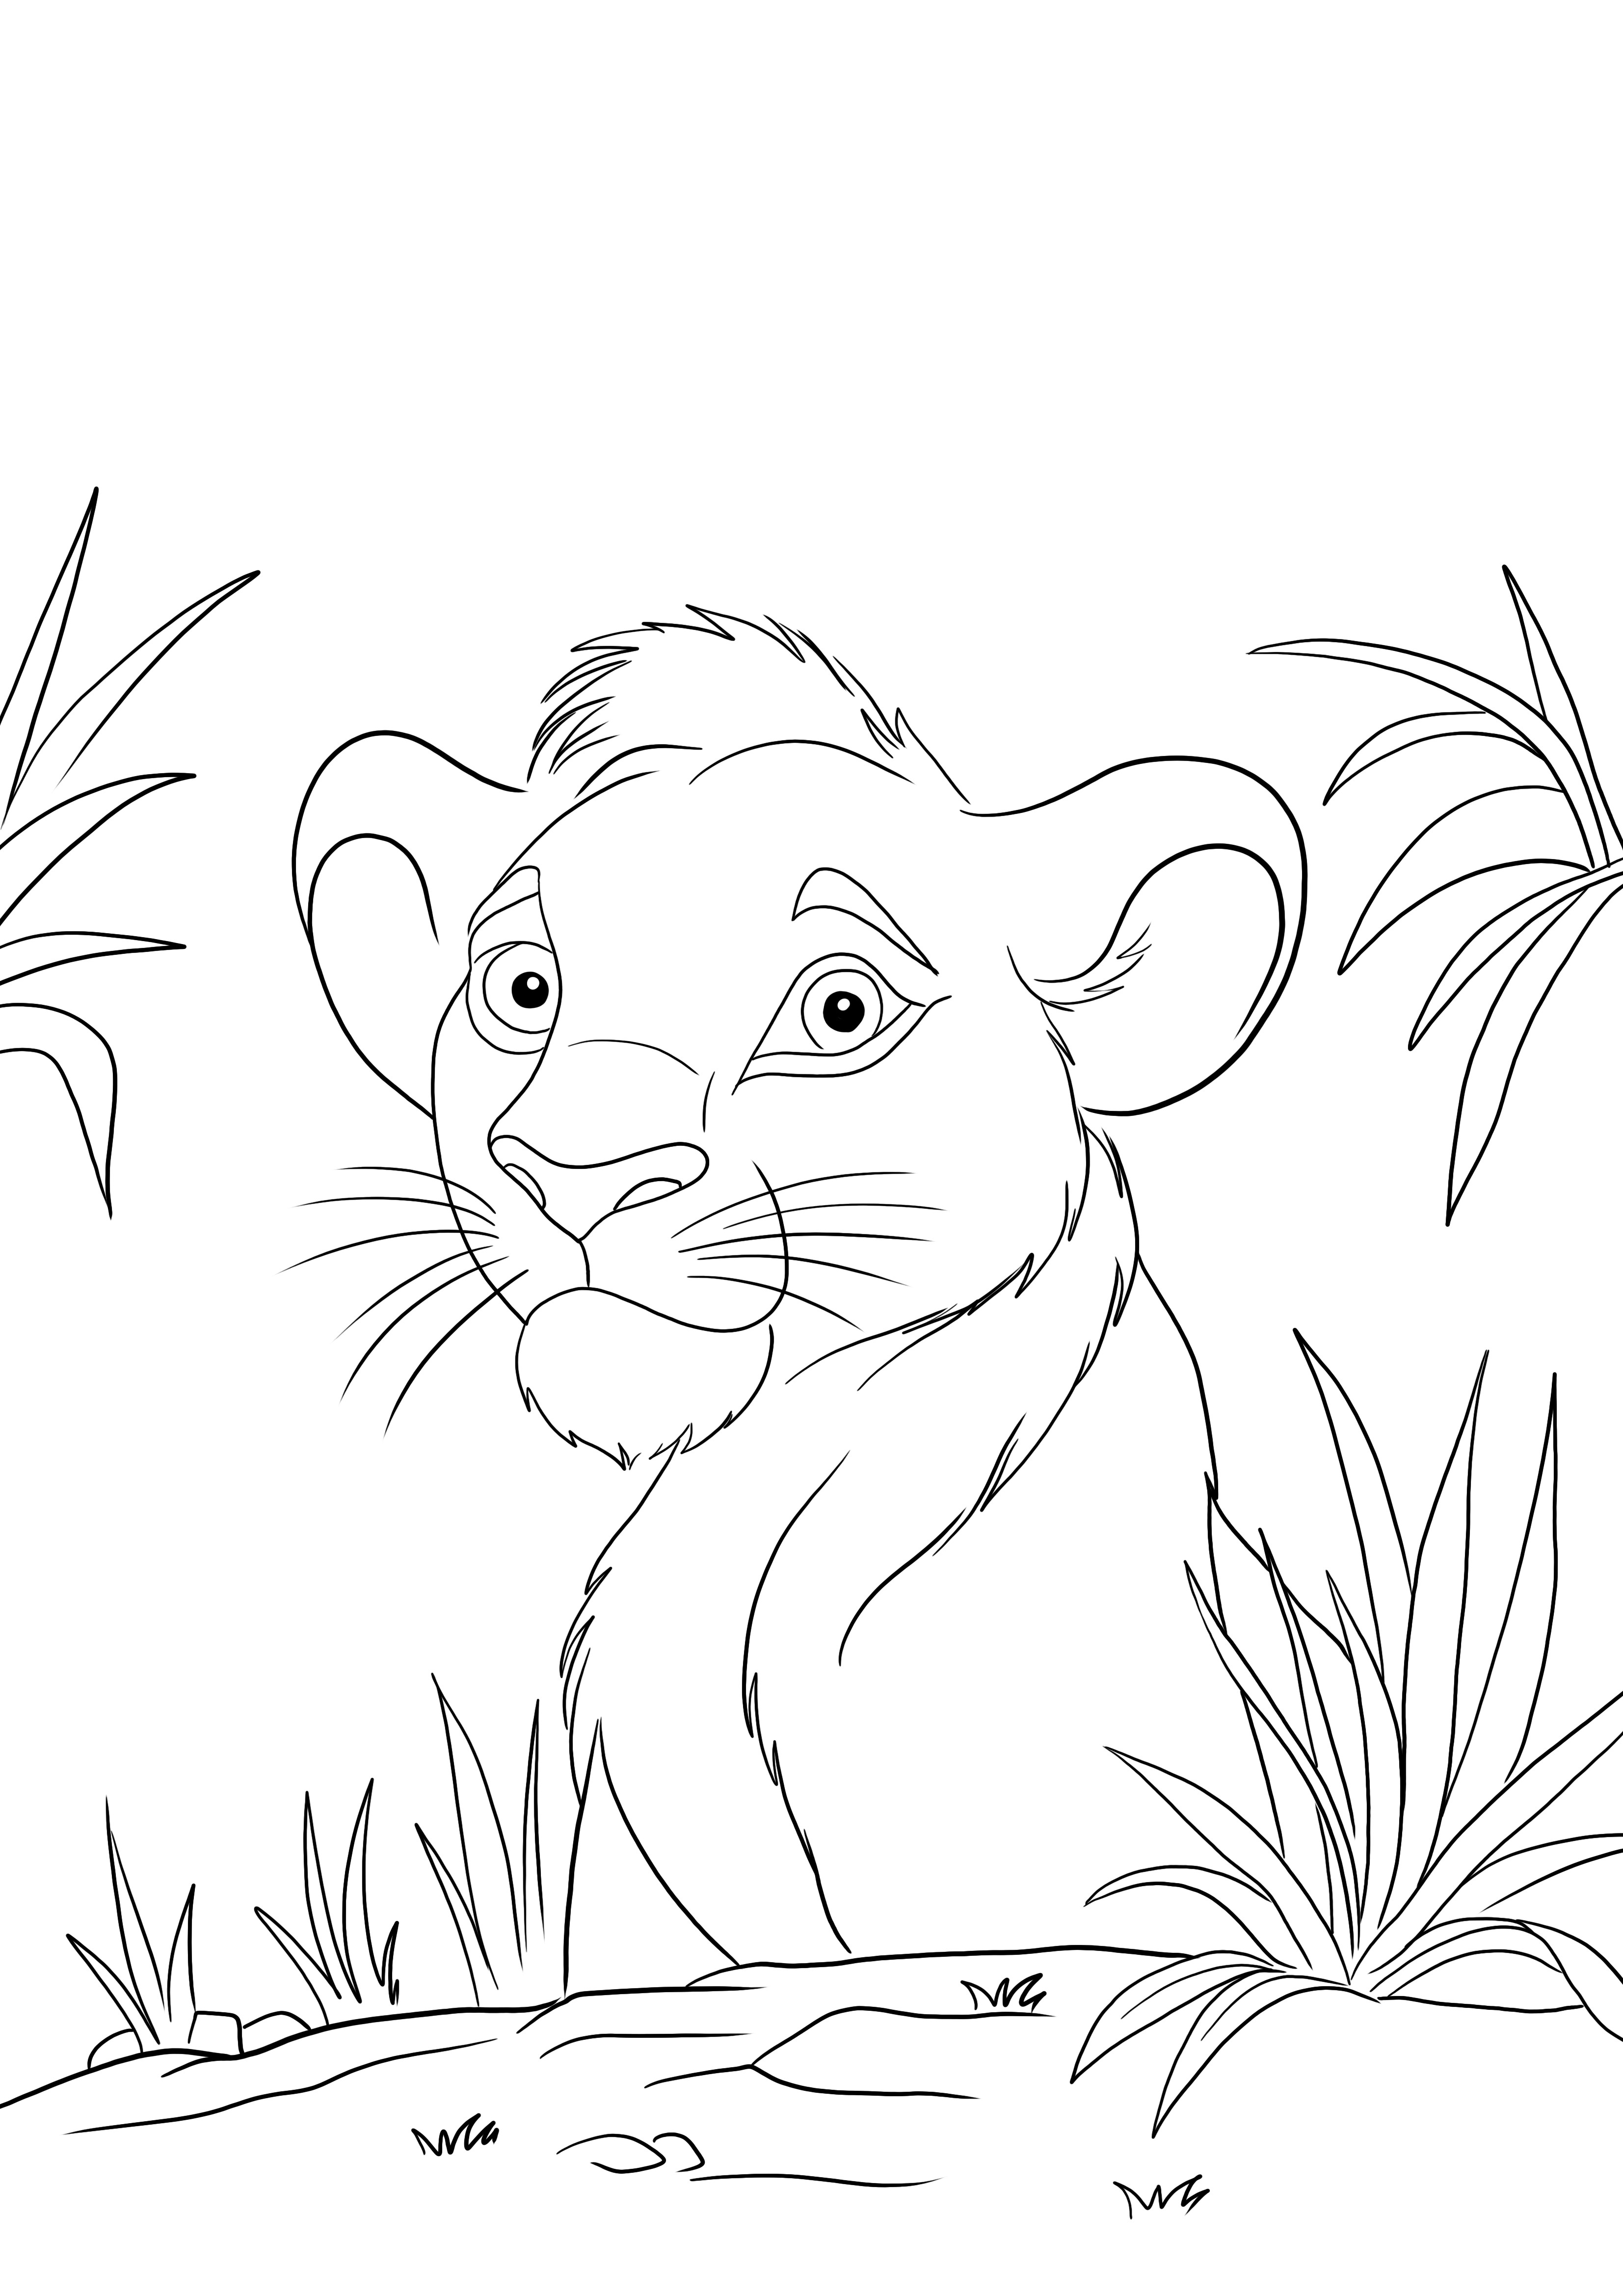 Simba from Lion's King easy coloring and free printable sheet